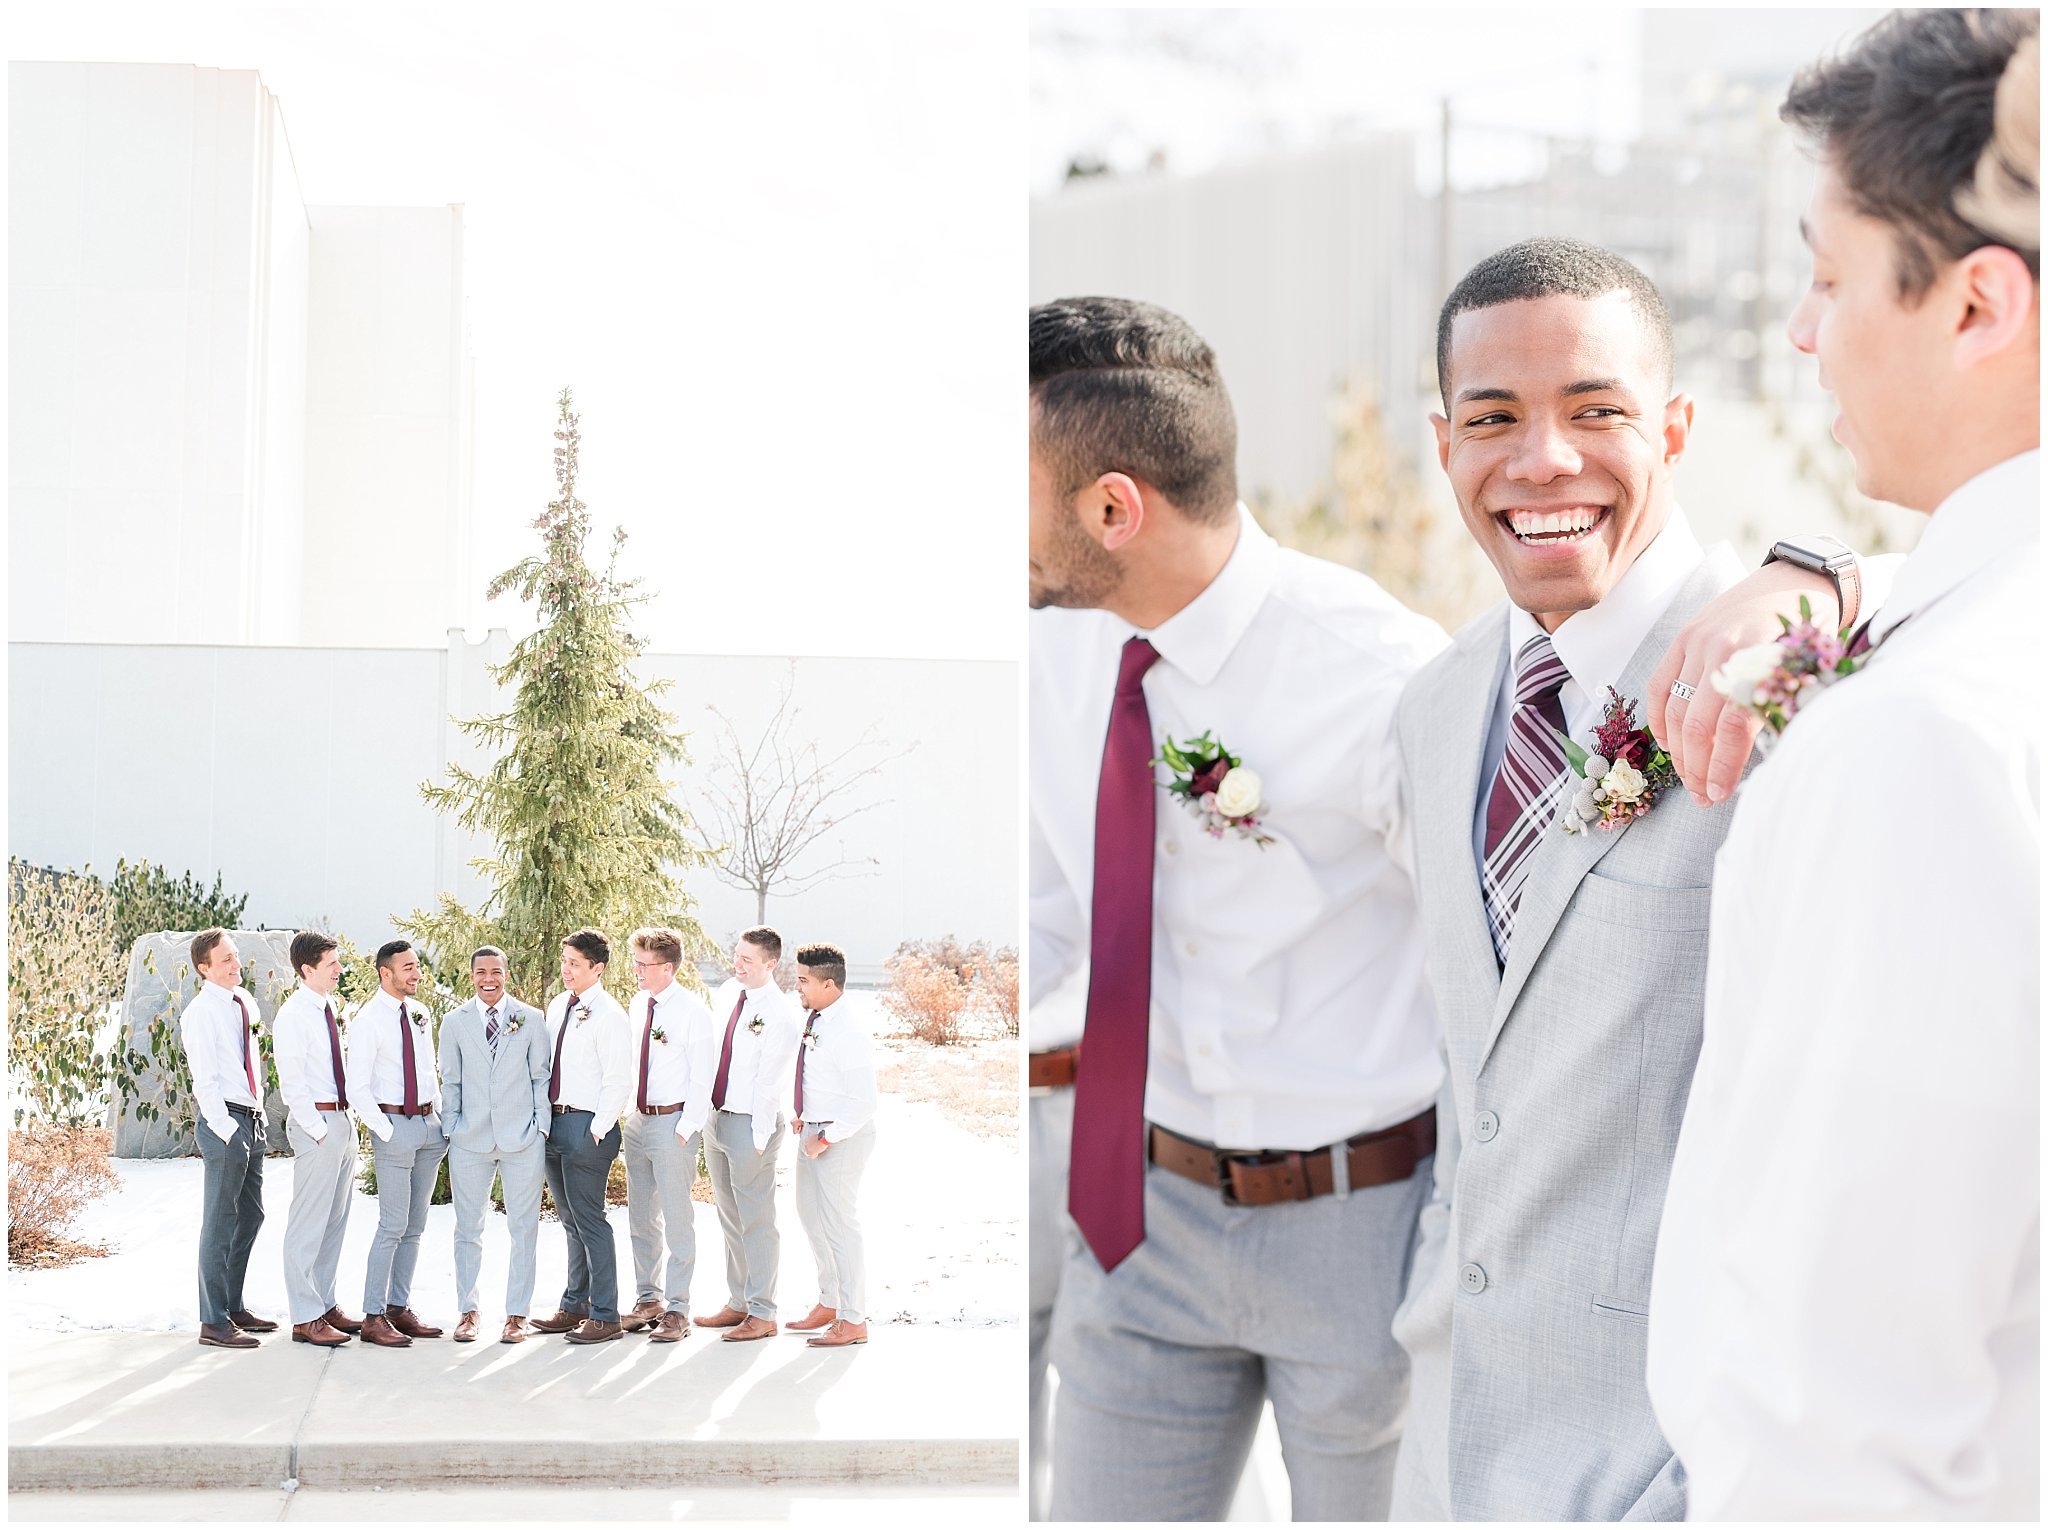 Bridal party photos in navy maxi dresses and burgundy ties at the Jordan River Temple | Burgundy and dusty rose bouquets | Jordan River Temple Winter Wedding | Jessie and Dallin Photography